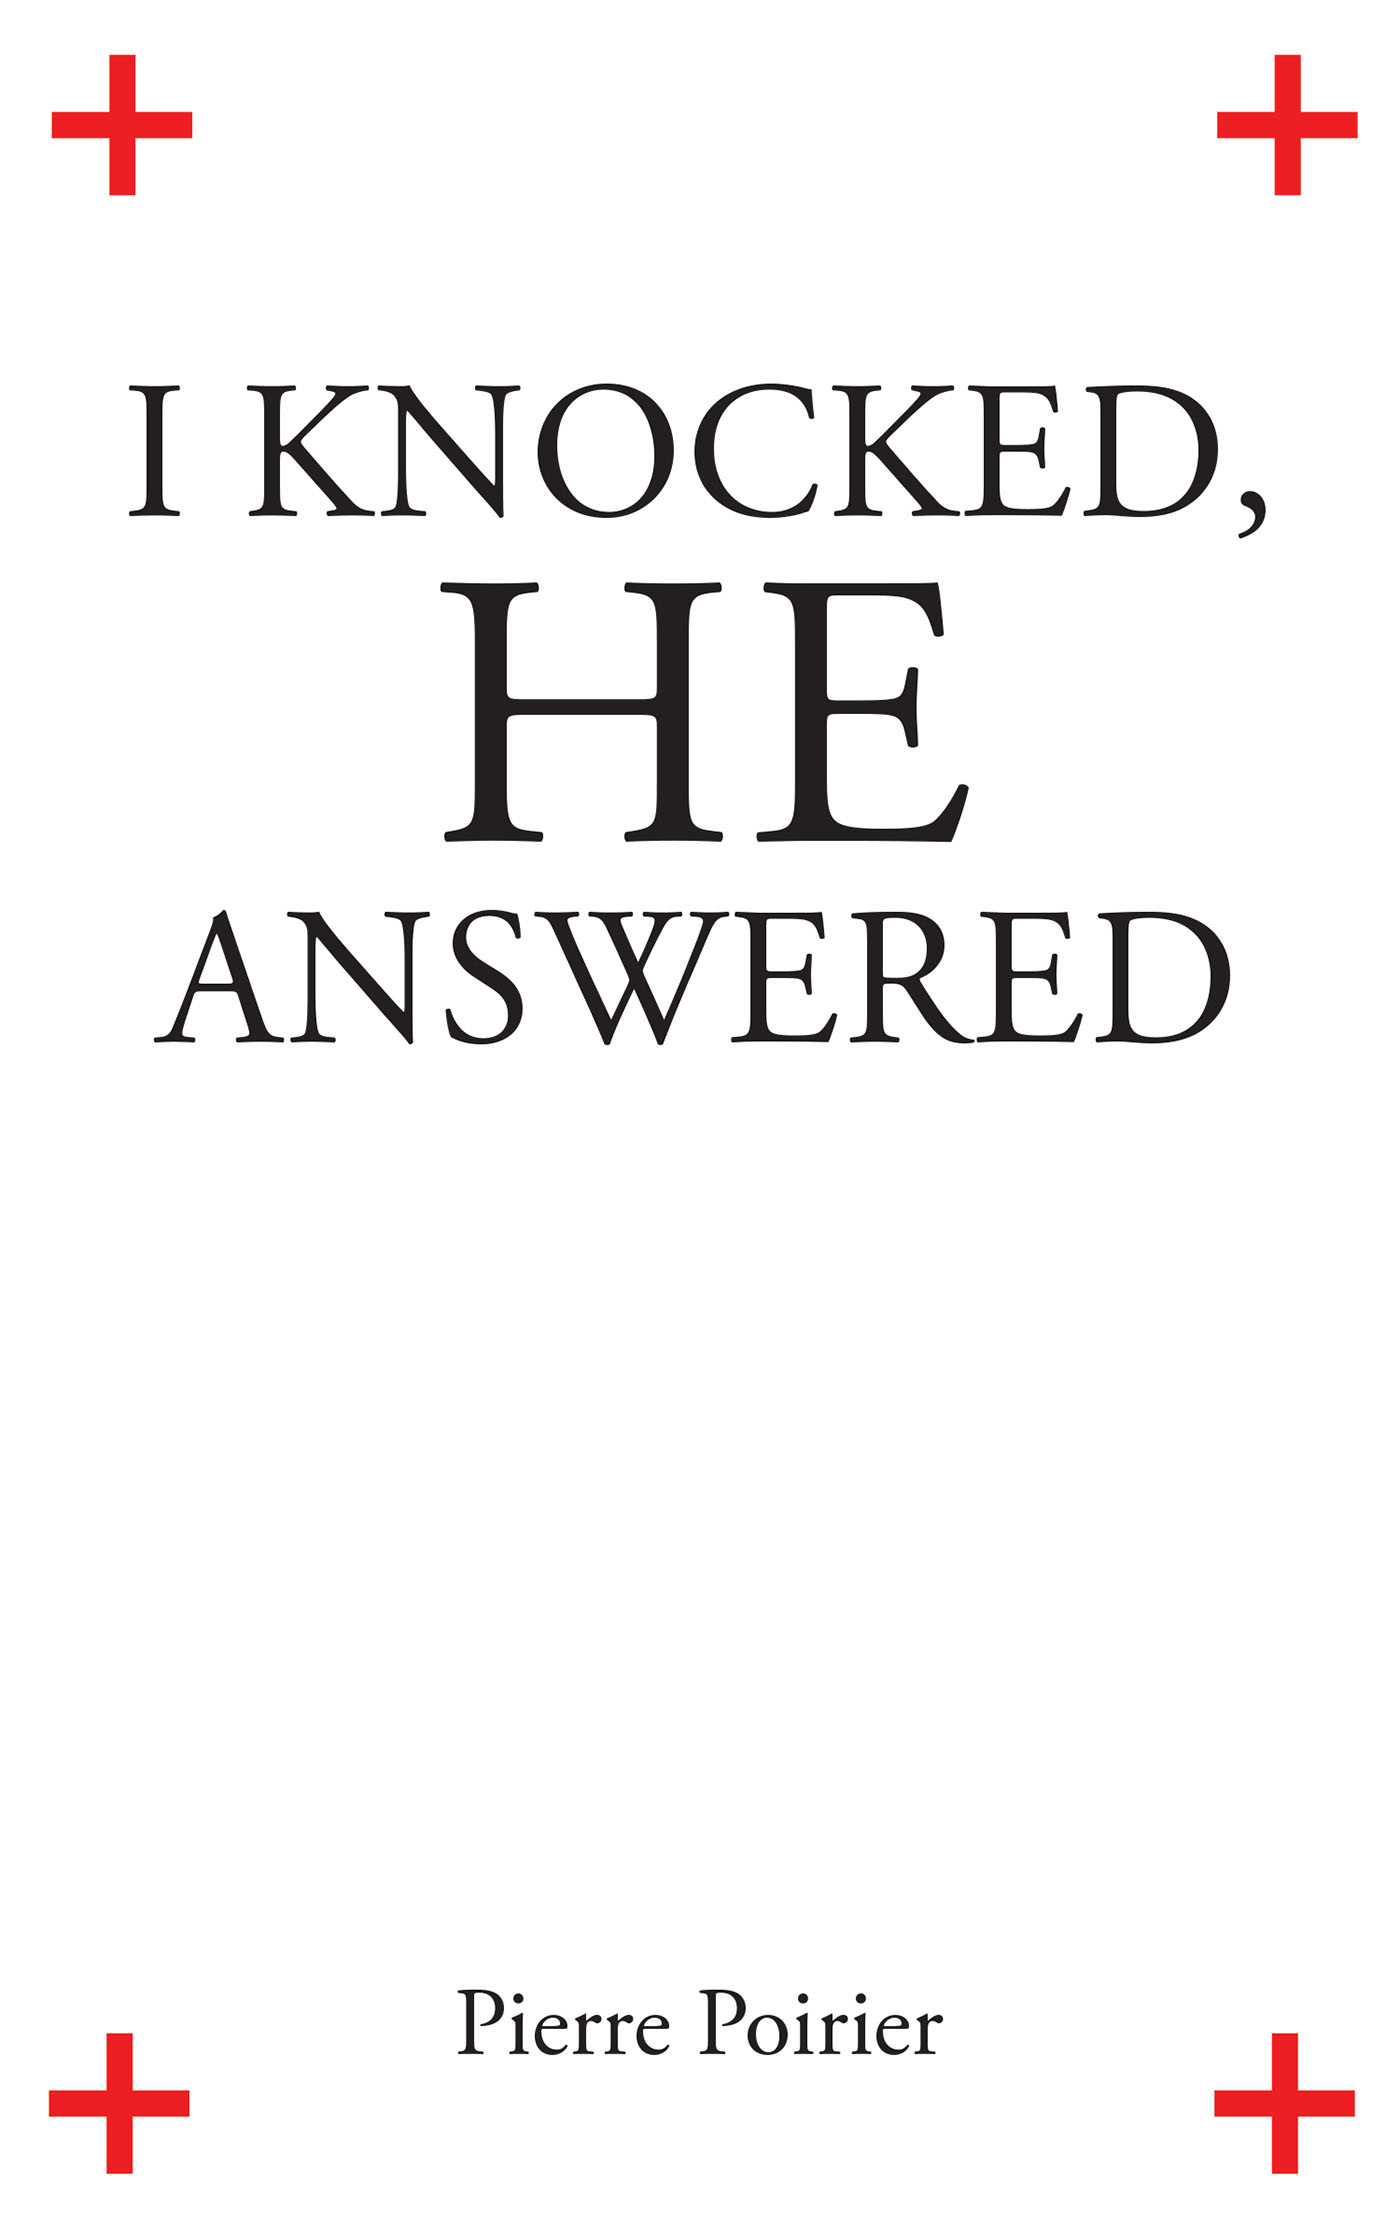 Author Pierre Poirier’s New Book, "I Knocked, He Answered," is a Testimony of the Most Important Spiritual Miracles Given to the Author by God